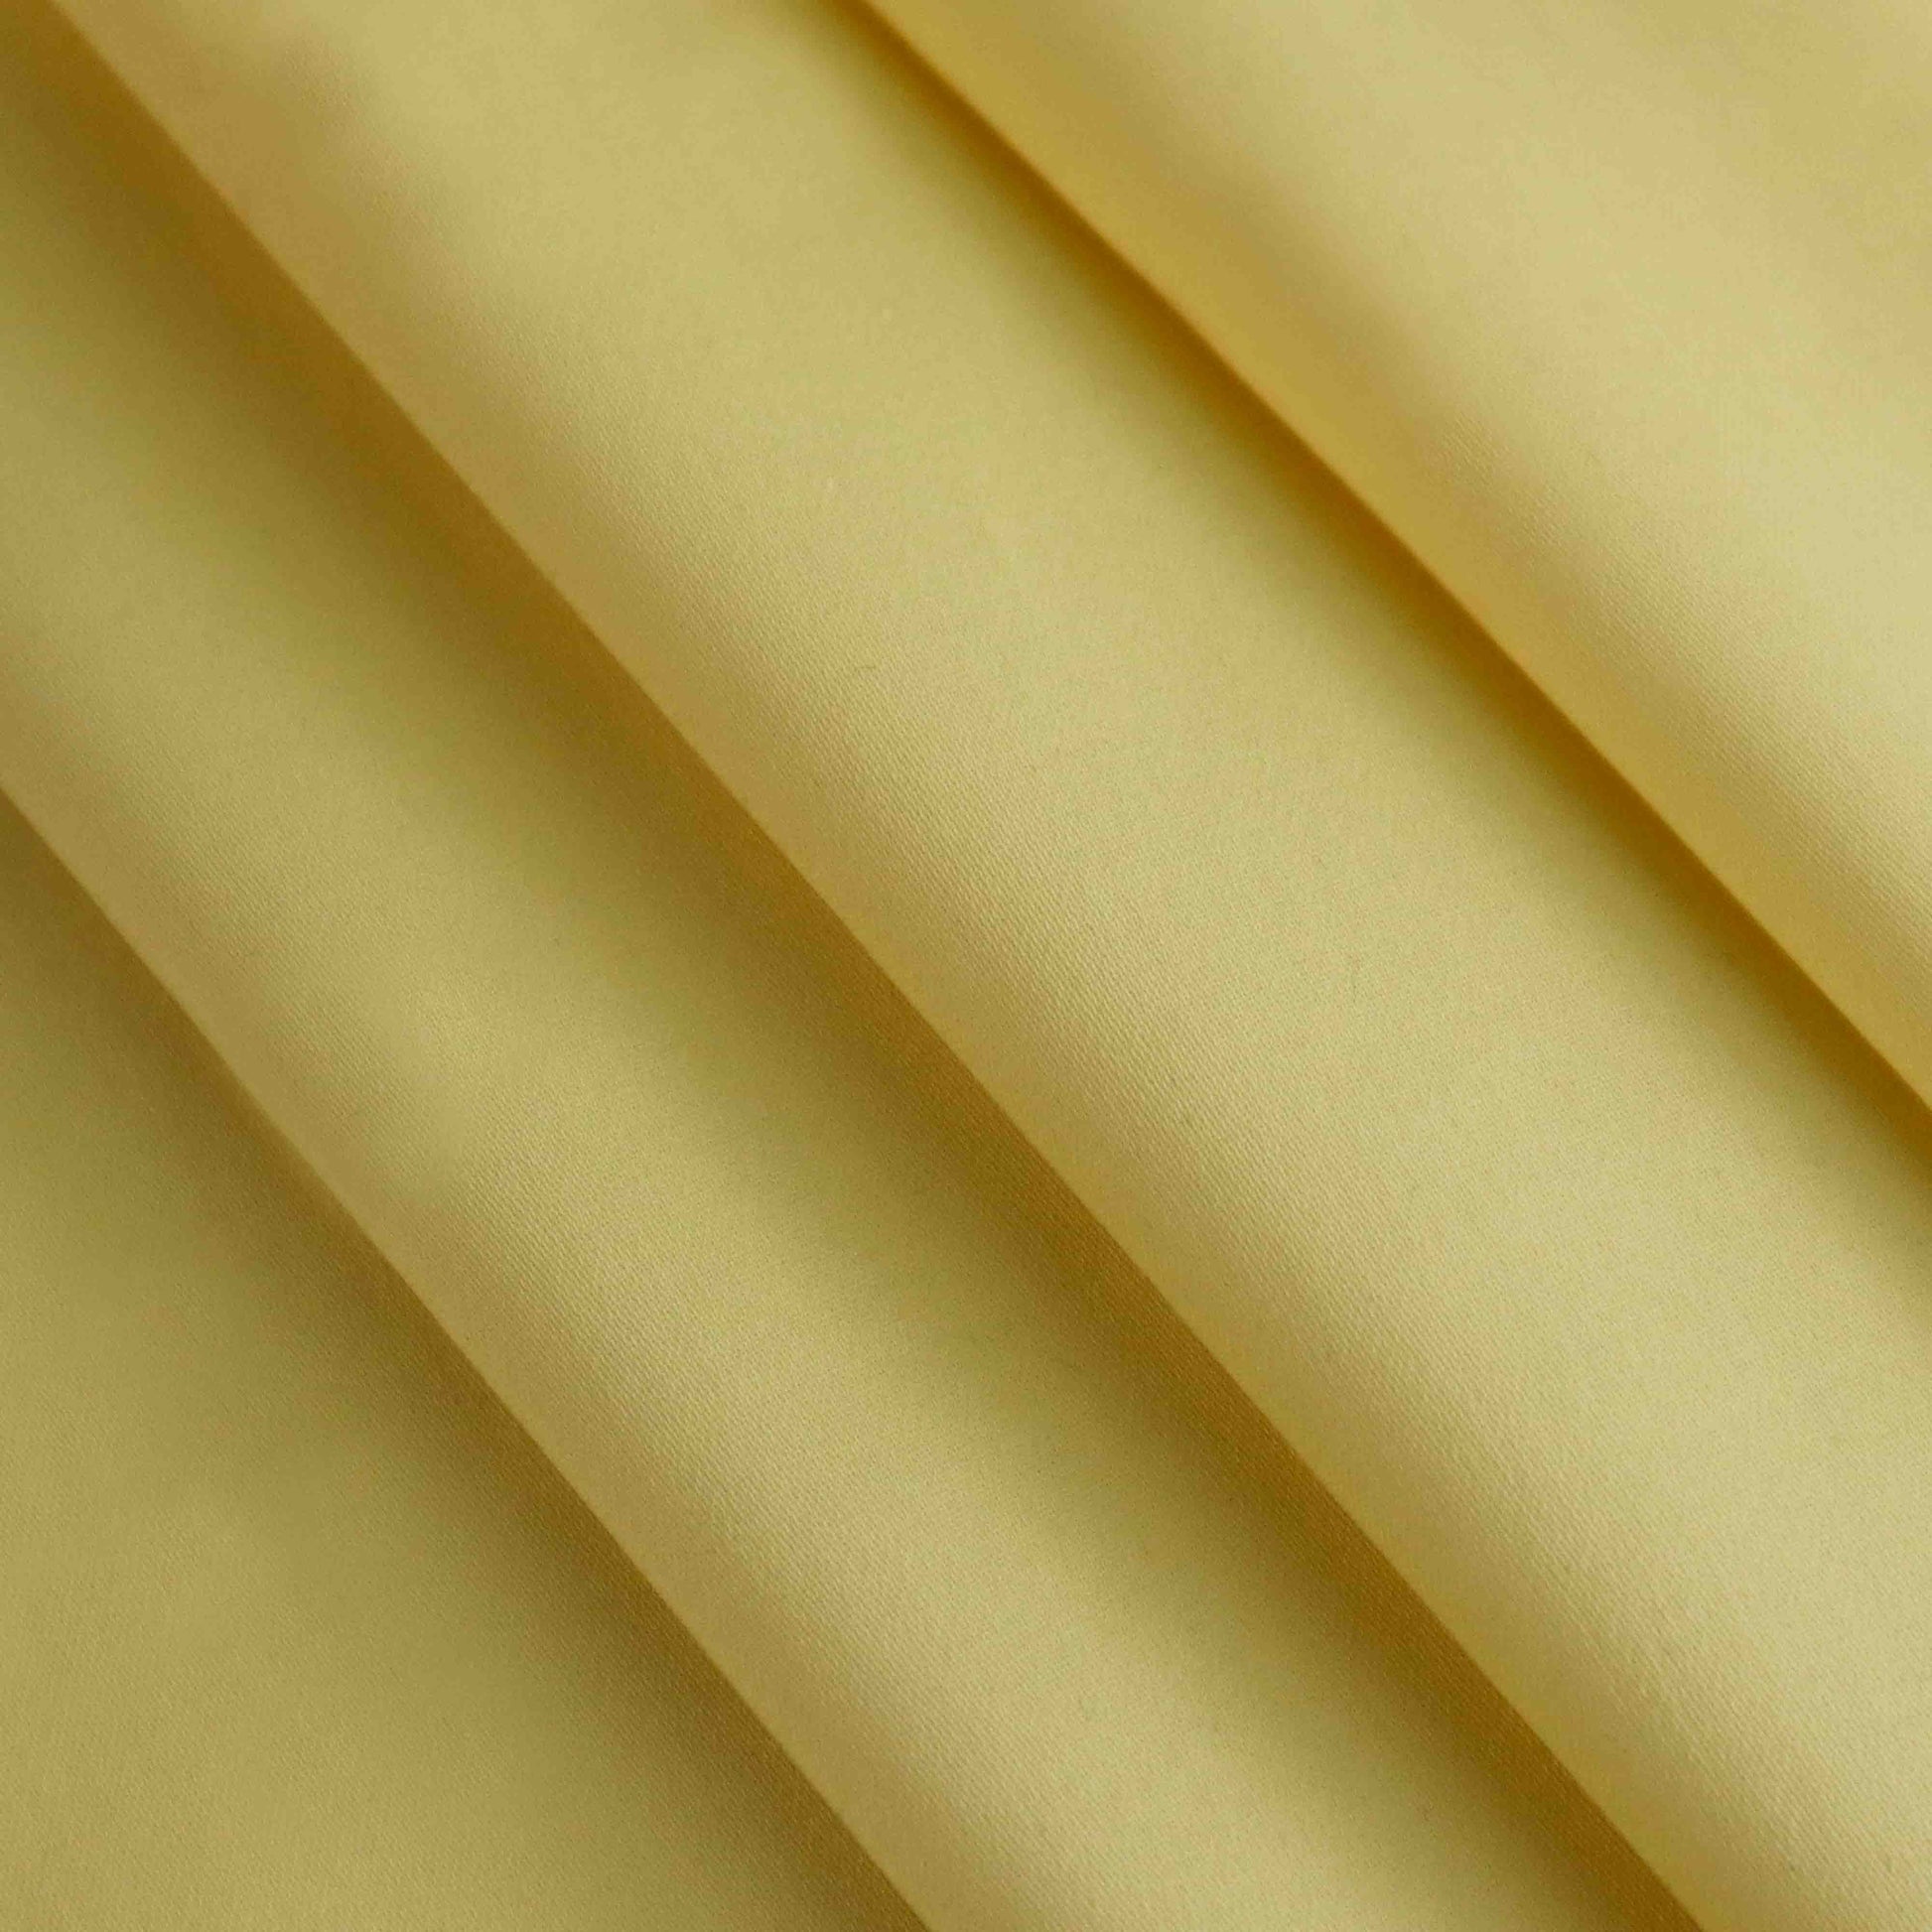 A Japanese-made lightweight cotton satin in Lemon. This fabric has a dry, smooth hand feel yet softens considerably after washing. This fluid-non stretch fabric has subtle texture throughout and matte finish.